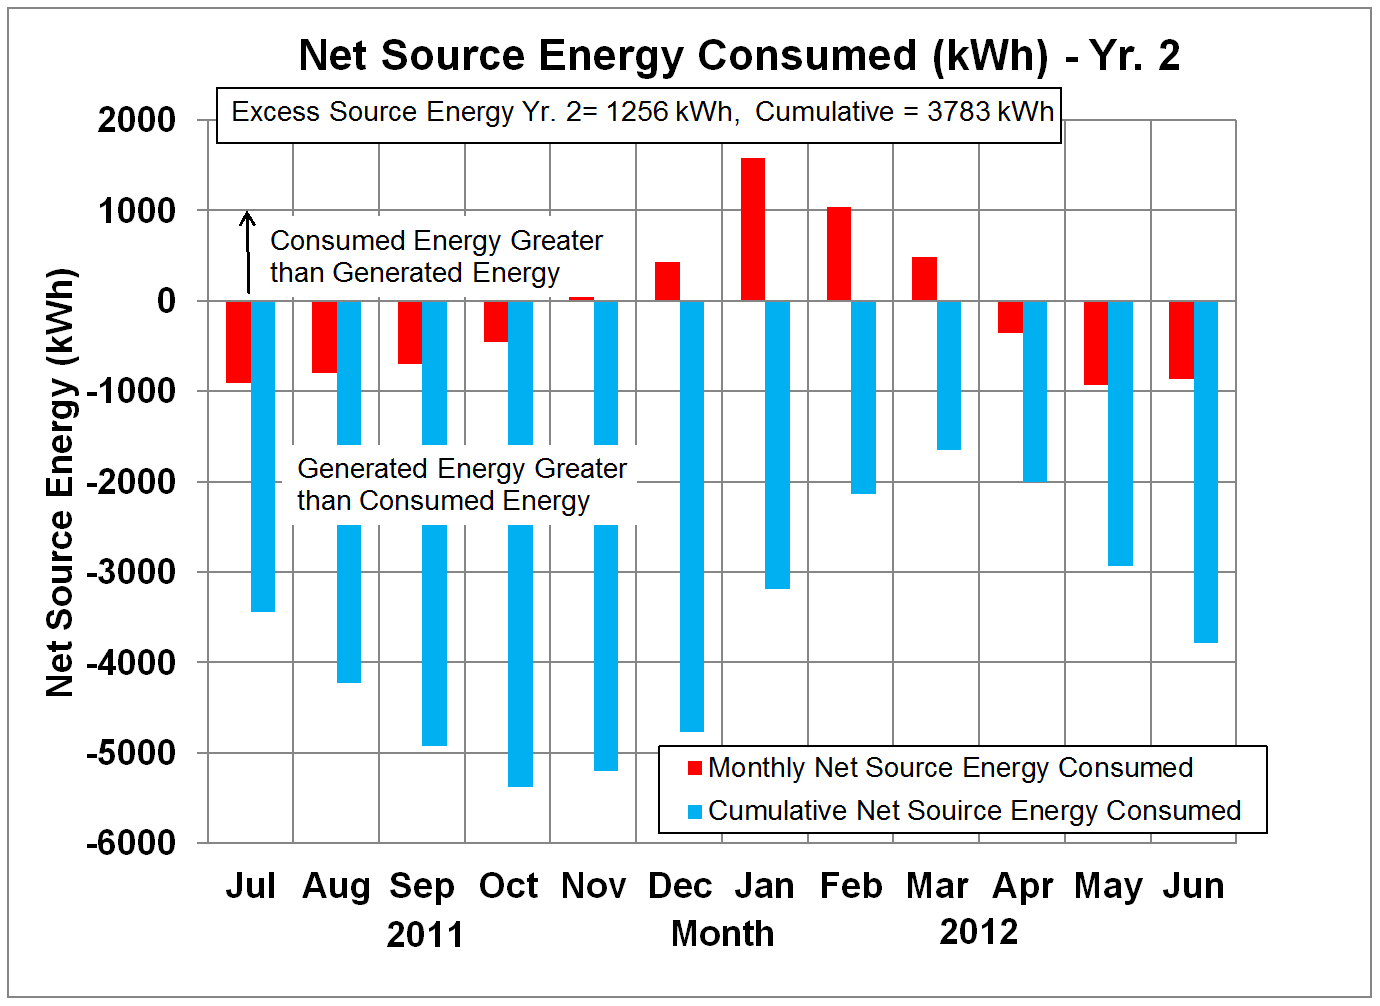 Net Source Energy in kWh - Yr. 2